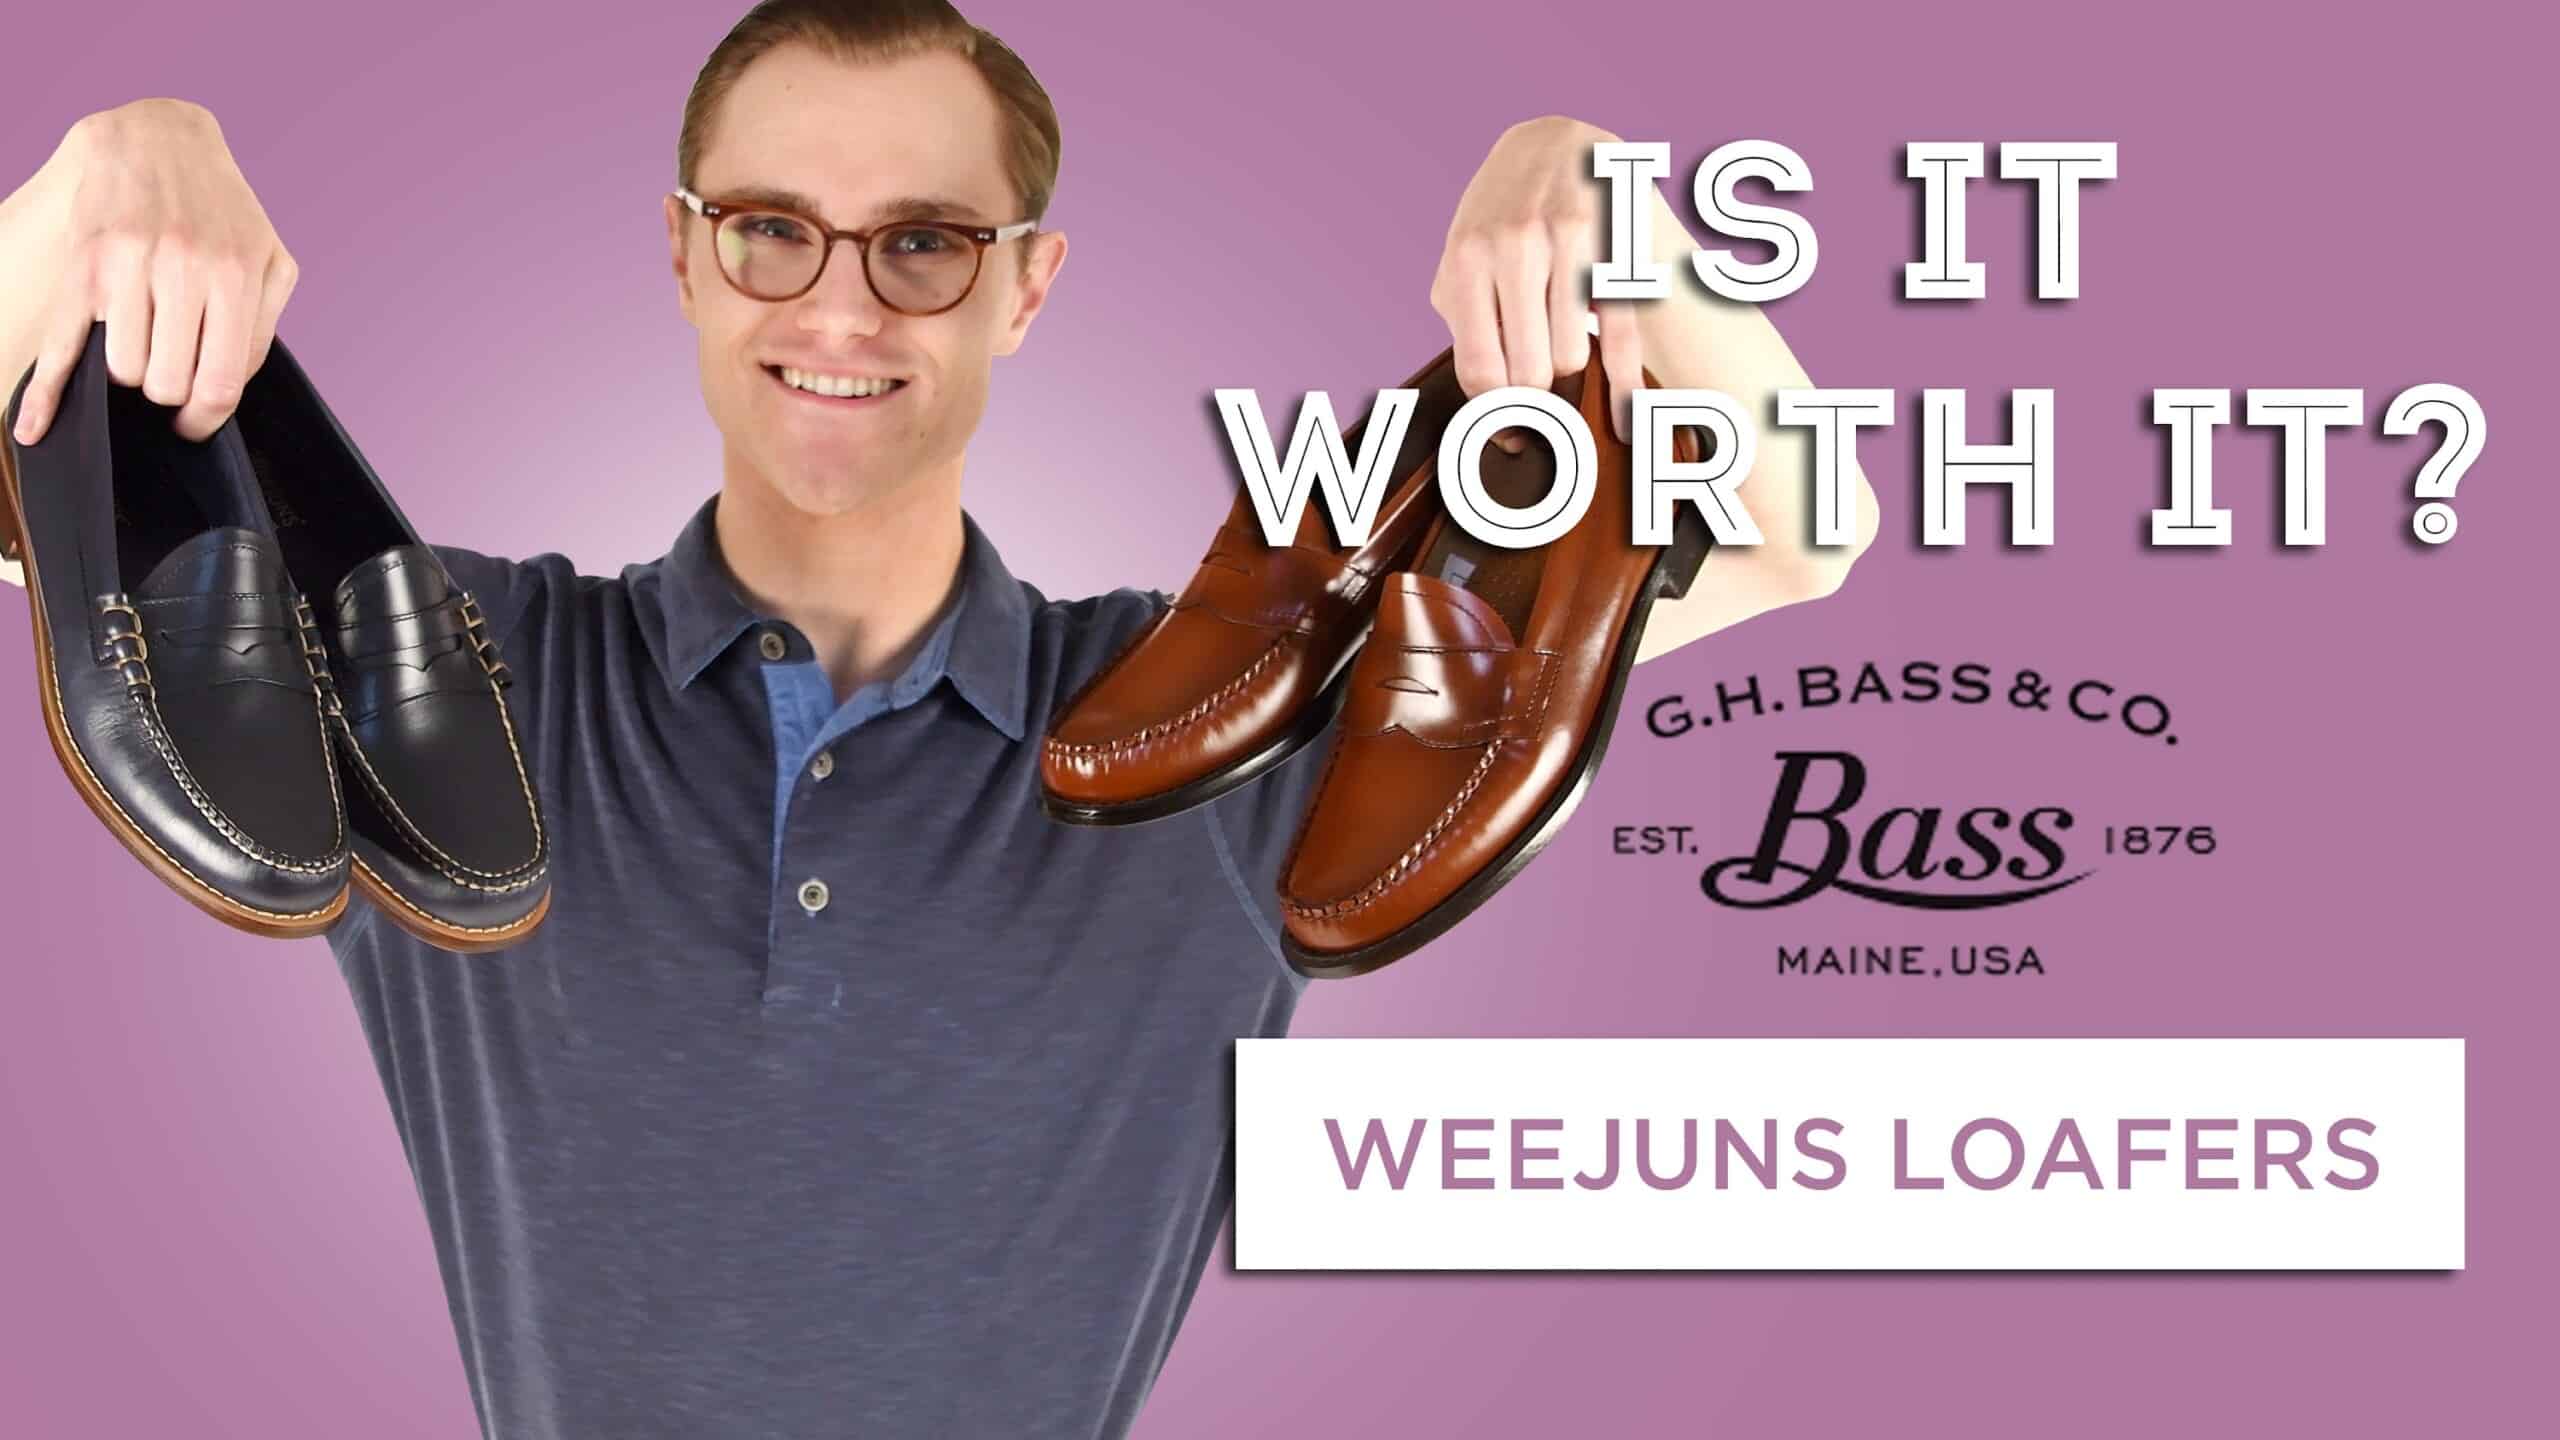 arbejde disk Station G.H. Bass "Weejuns" Loafers: Is It Worth It? - Trad Penny Loafer Review